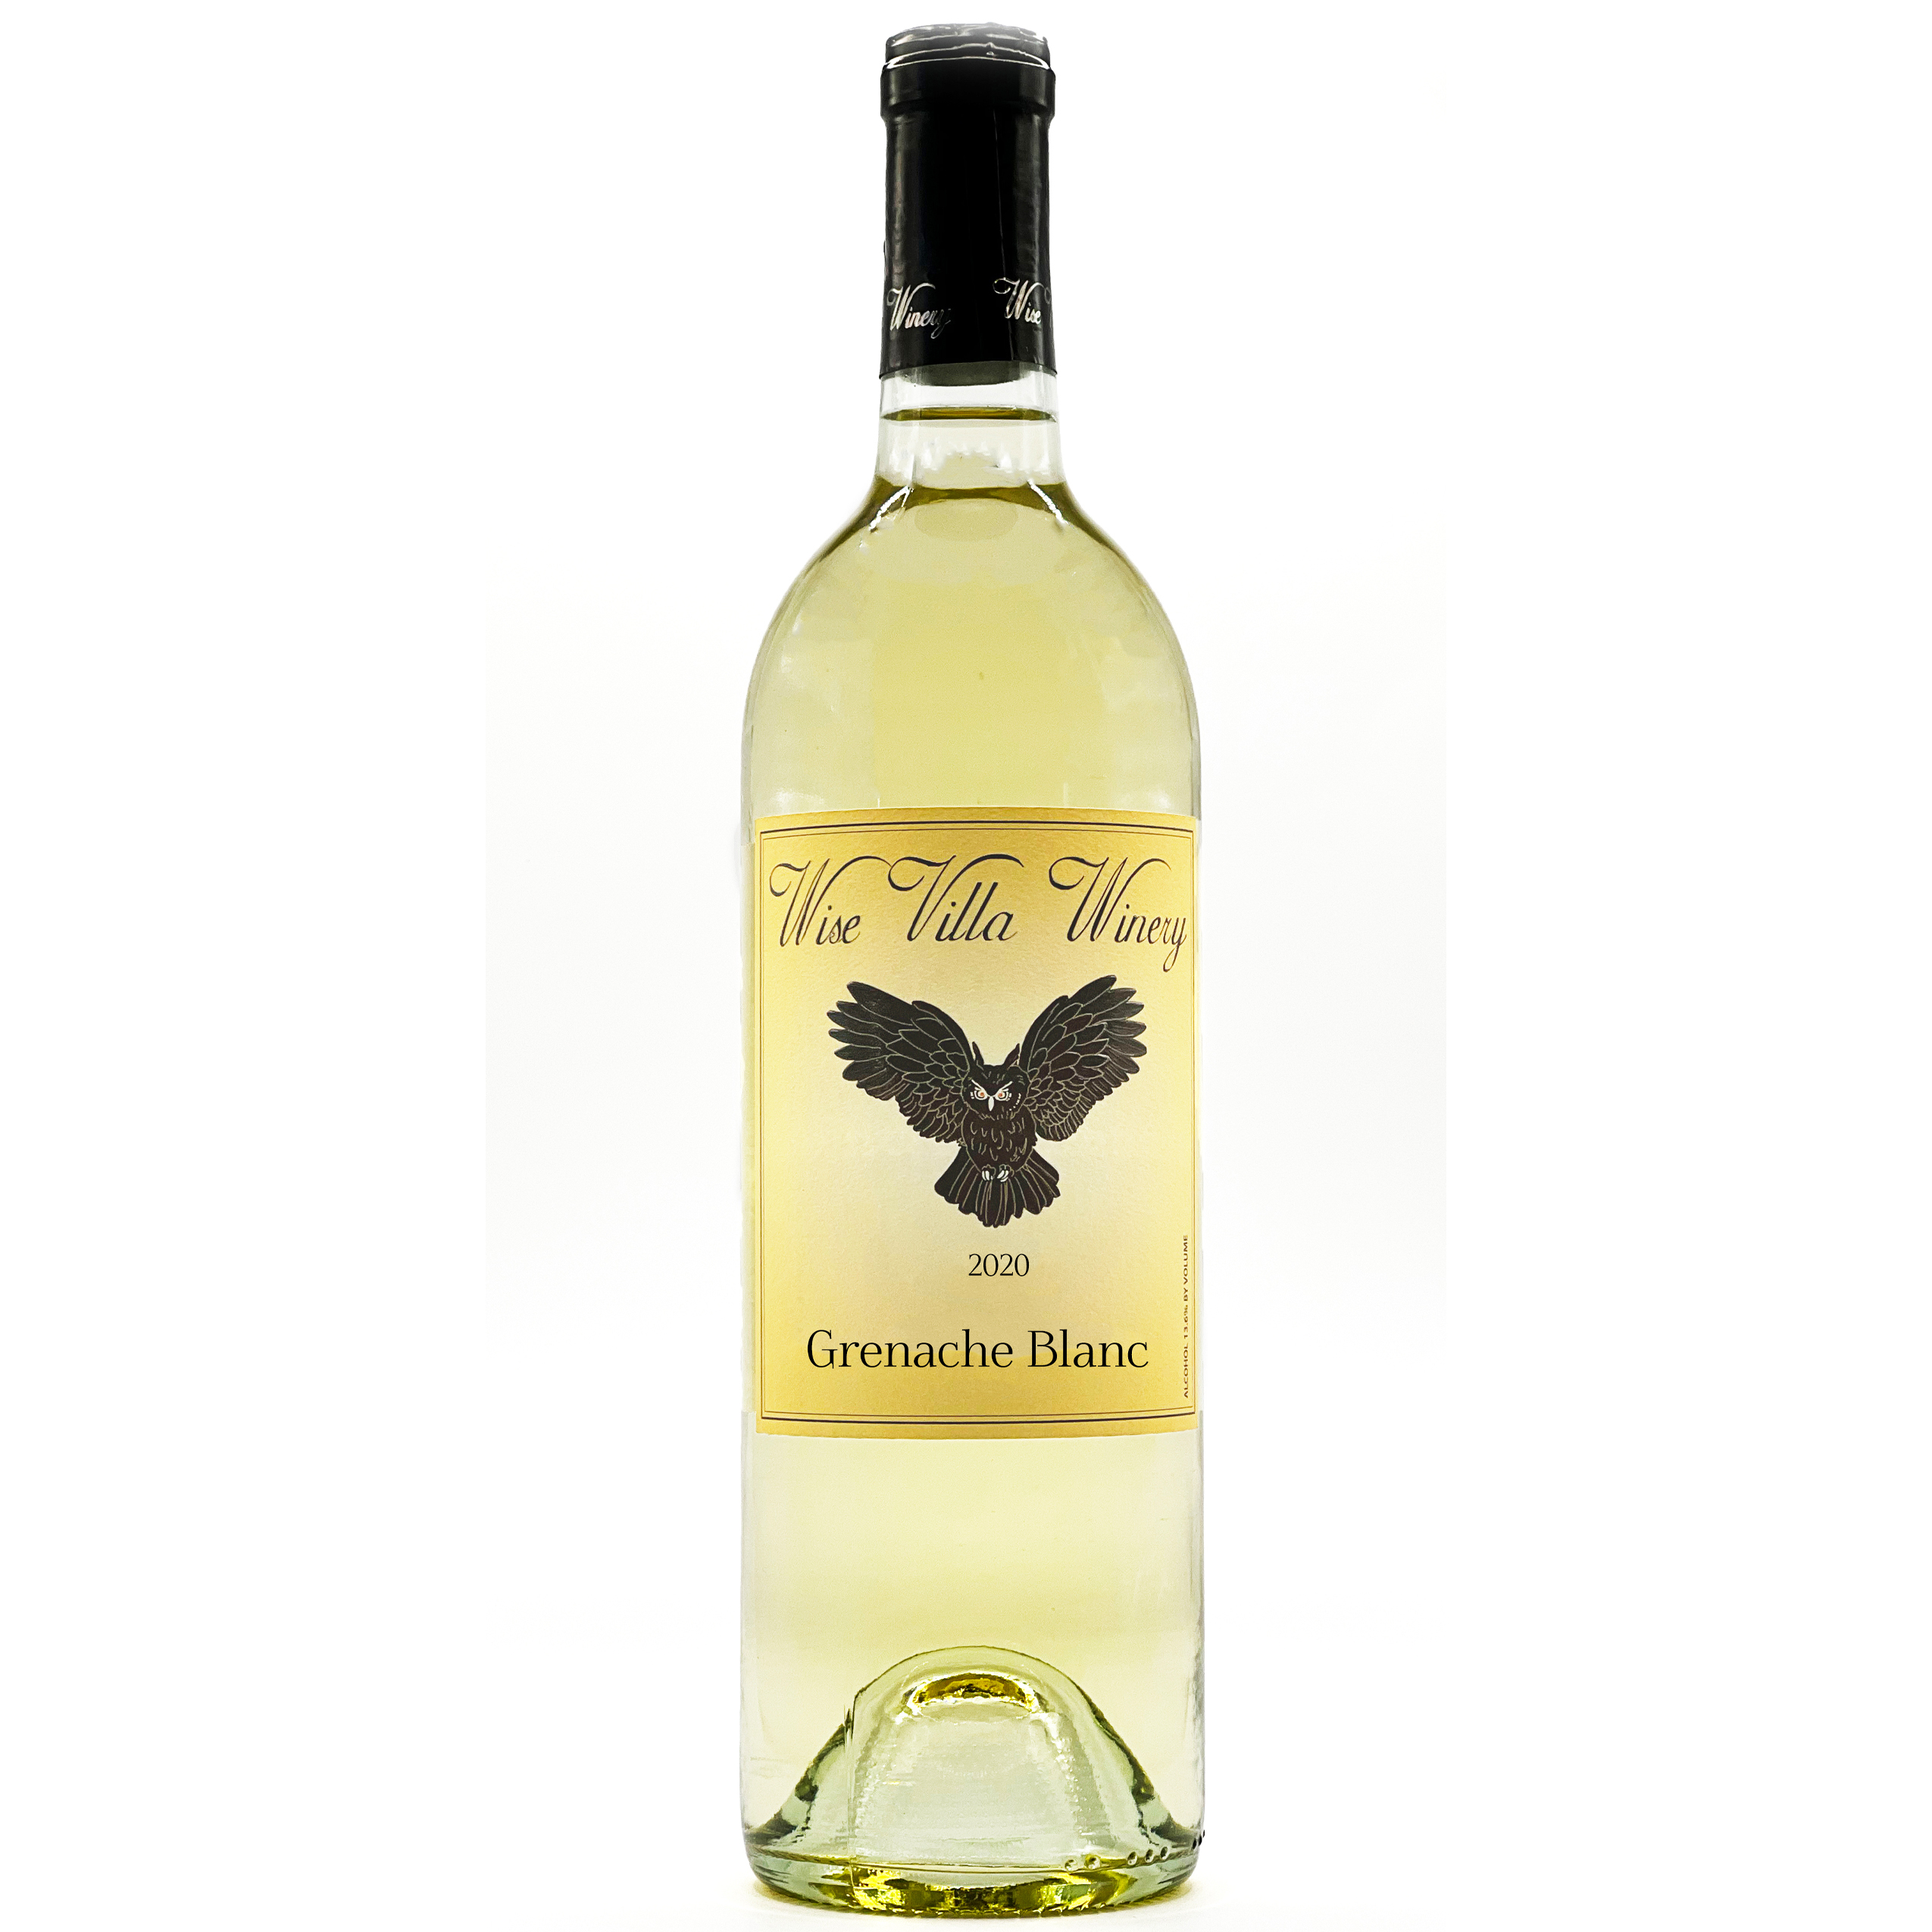 Product Image for 2020 Grenache Blanc